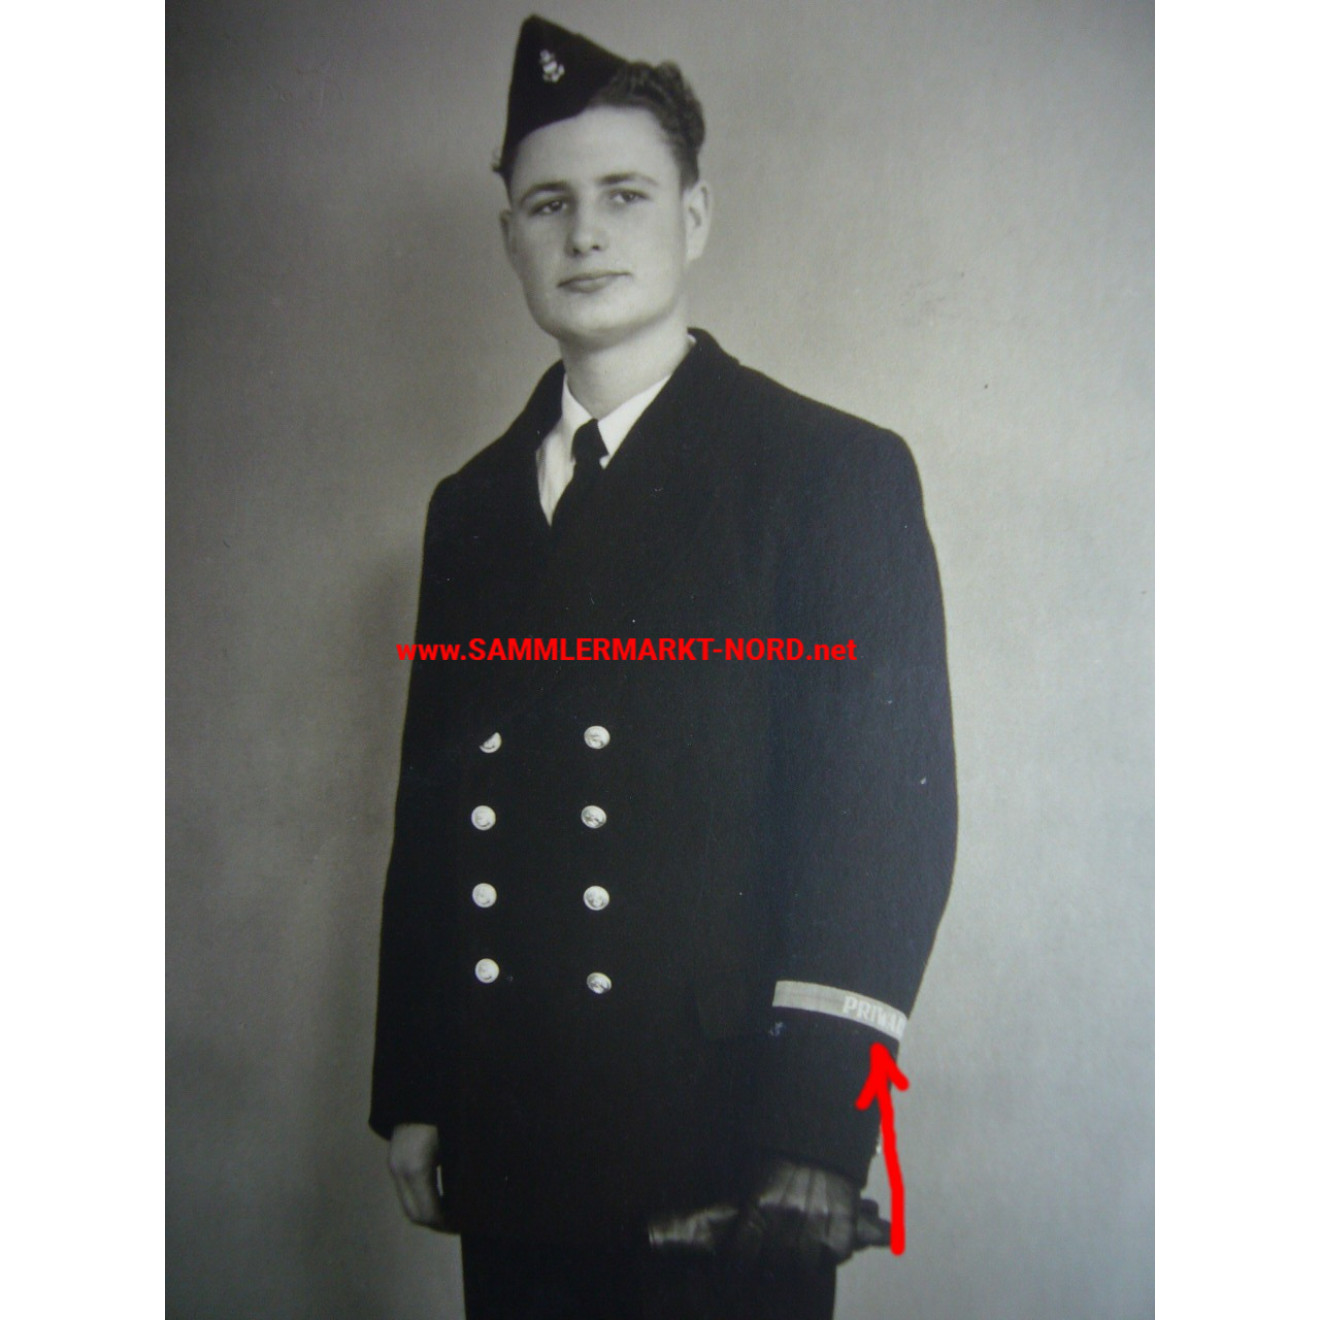 German Navy - Sailor of the sailor school Priwall with cuff title "PRIWALL"